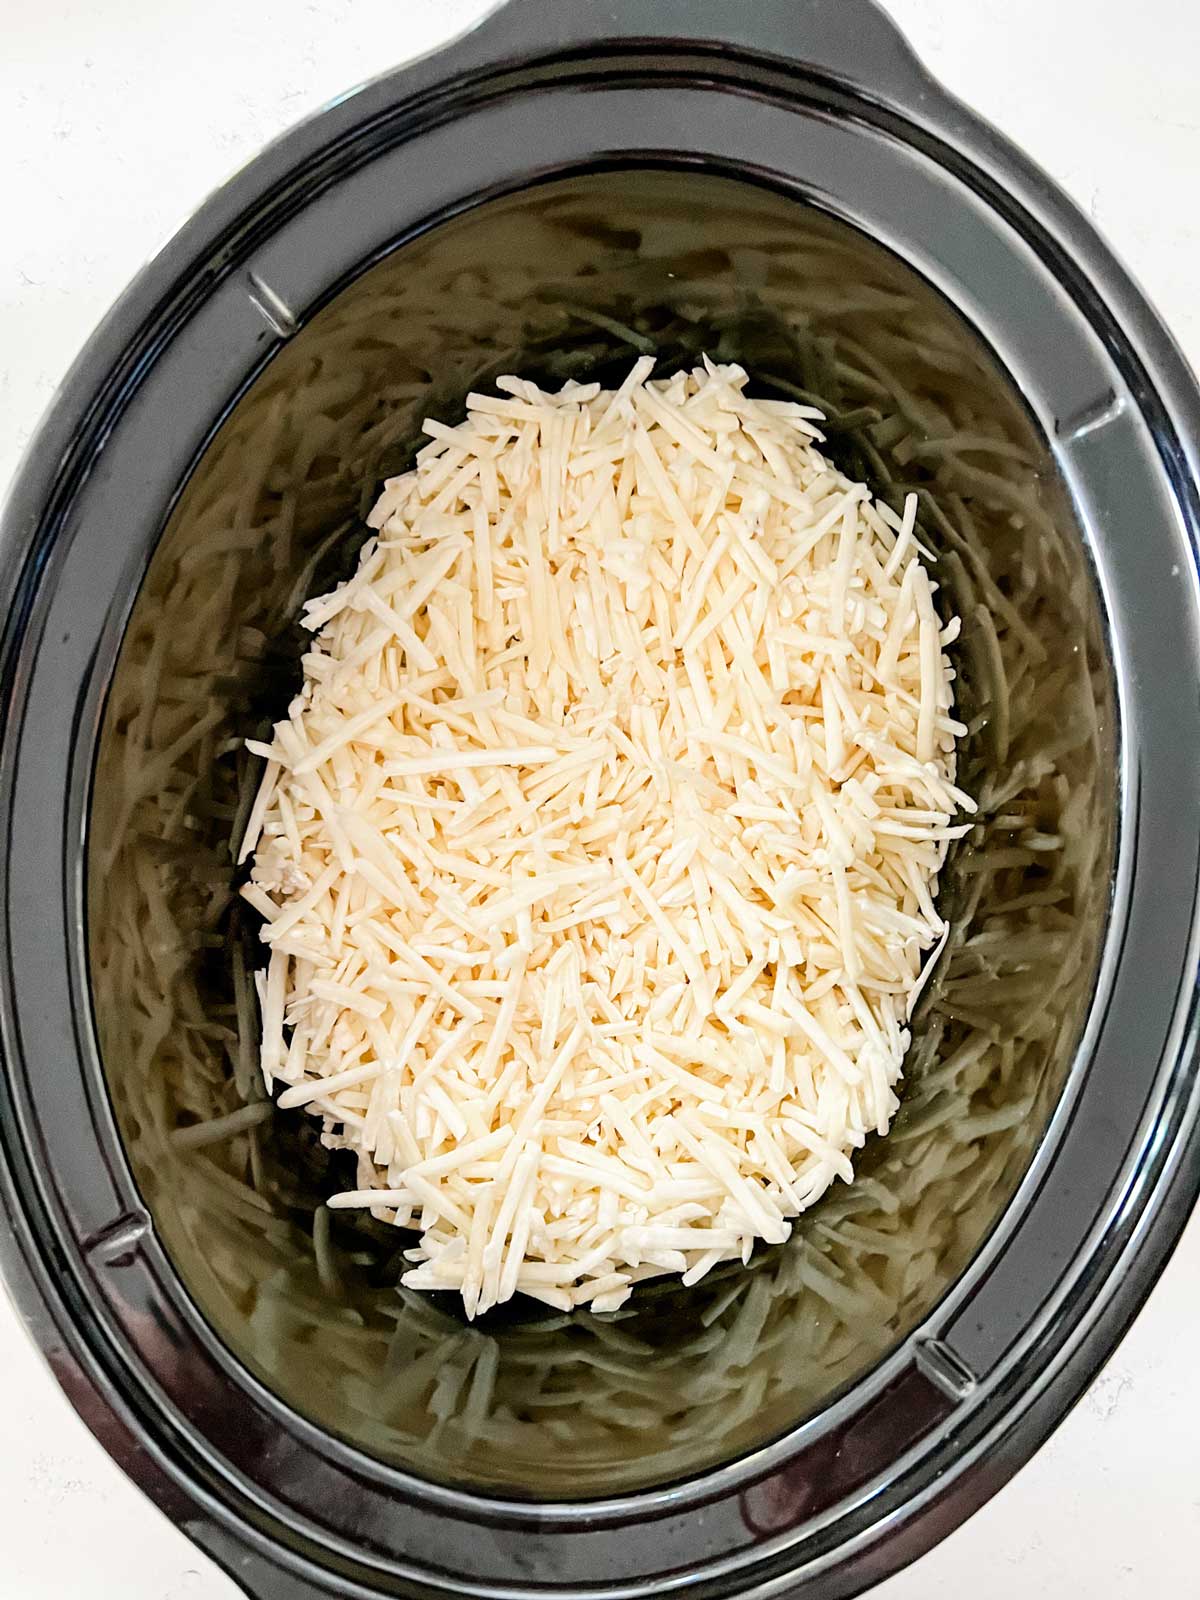 Hash browns in the bottom of a slow cooker.